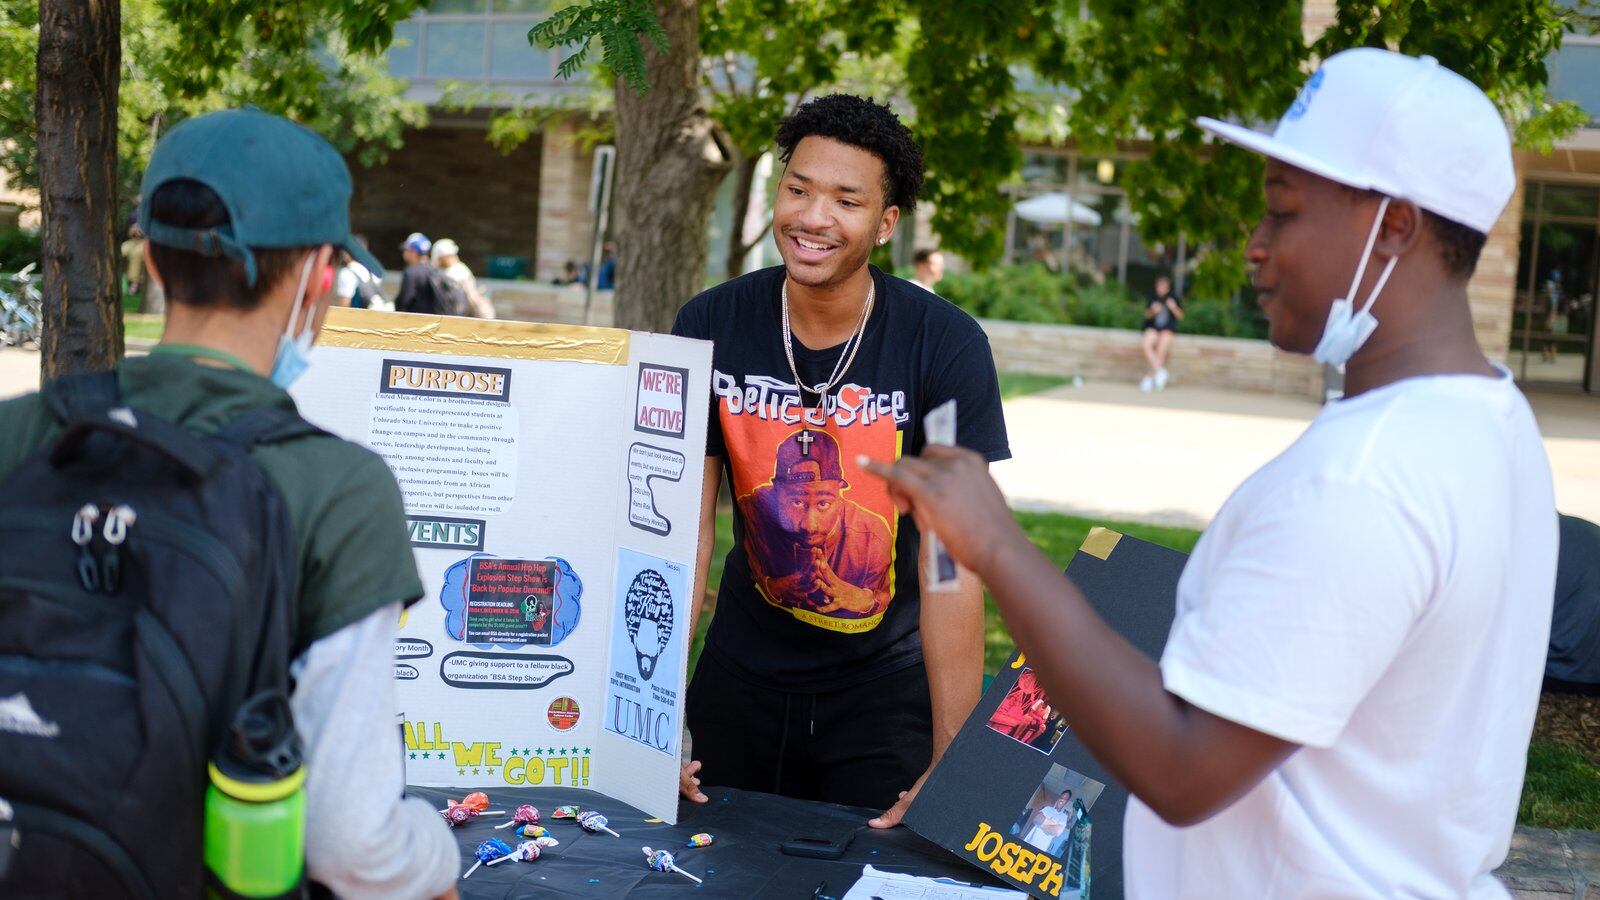 Two young men talk to a fellow student student about their on-campus group, United Men of Color, during a student involvement fair.